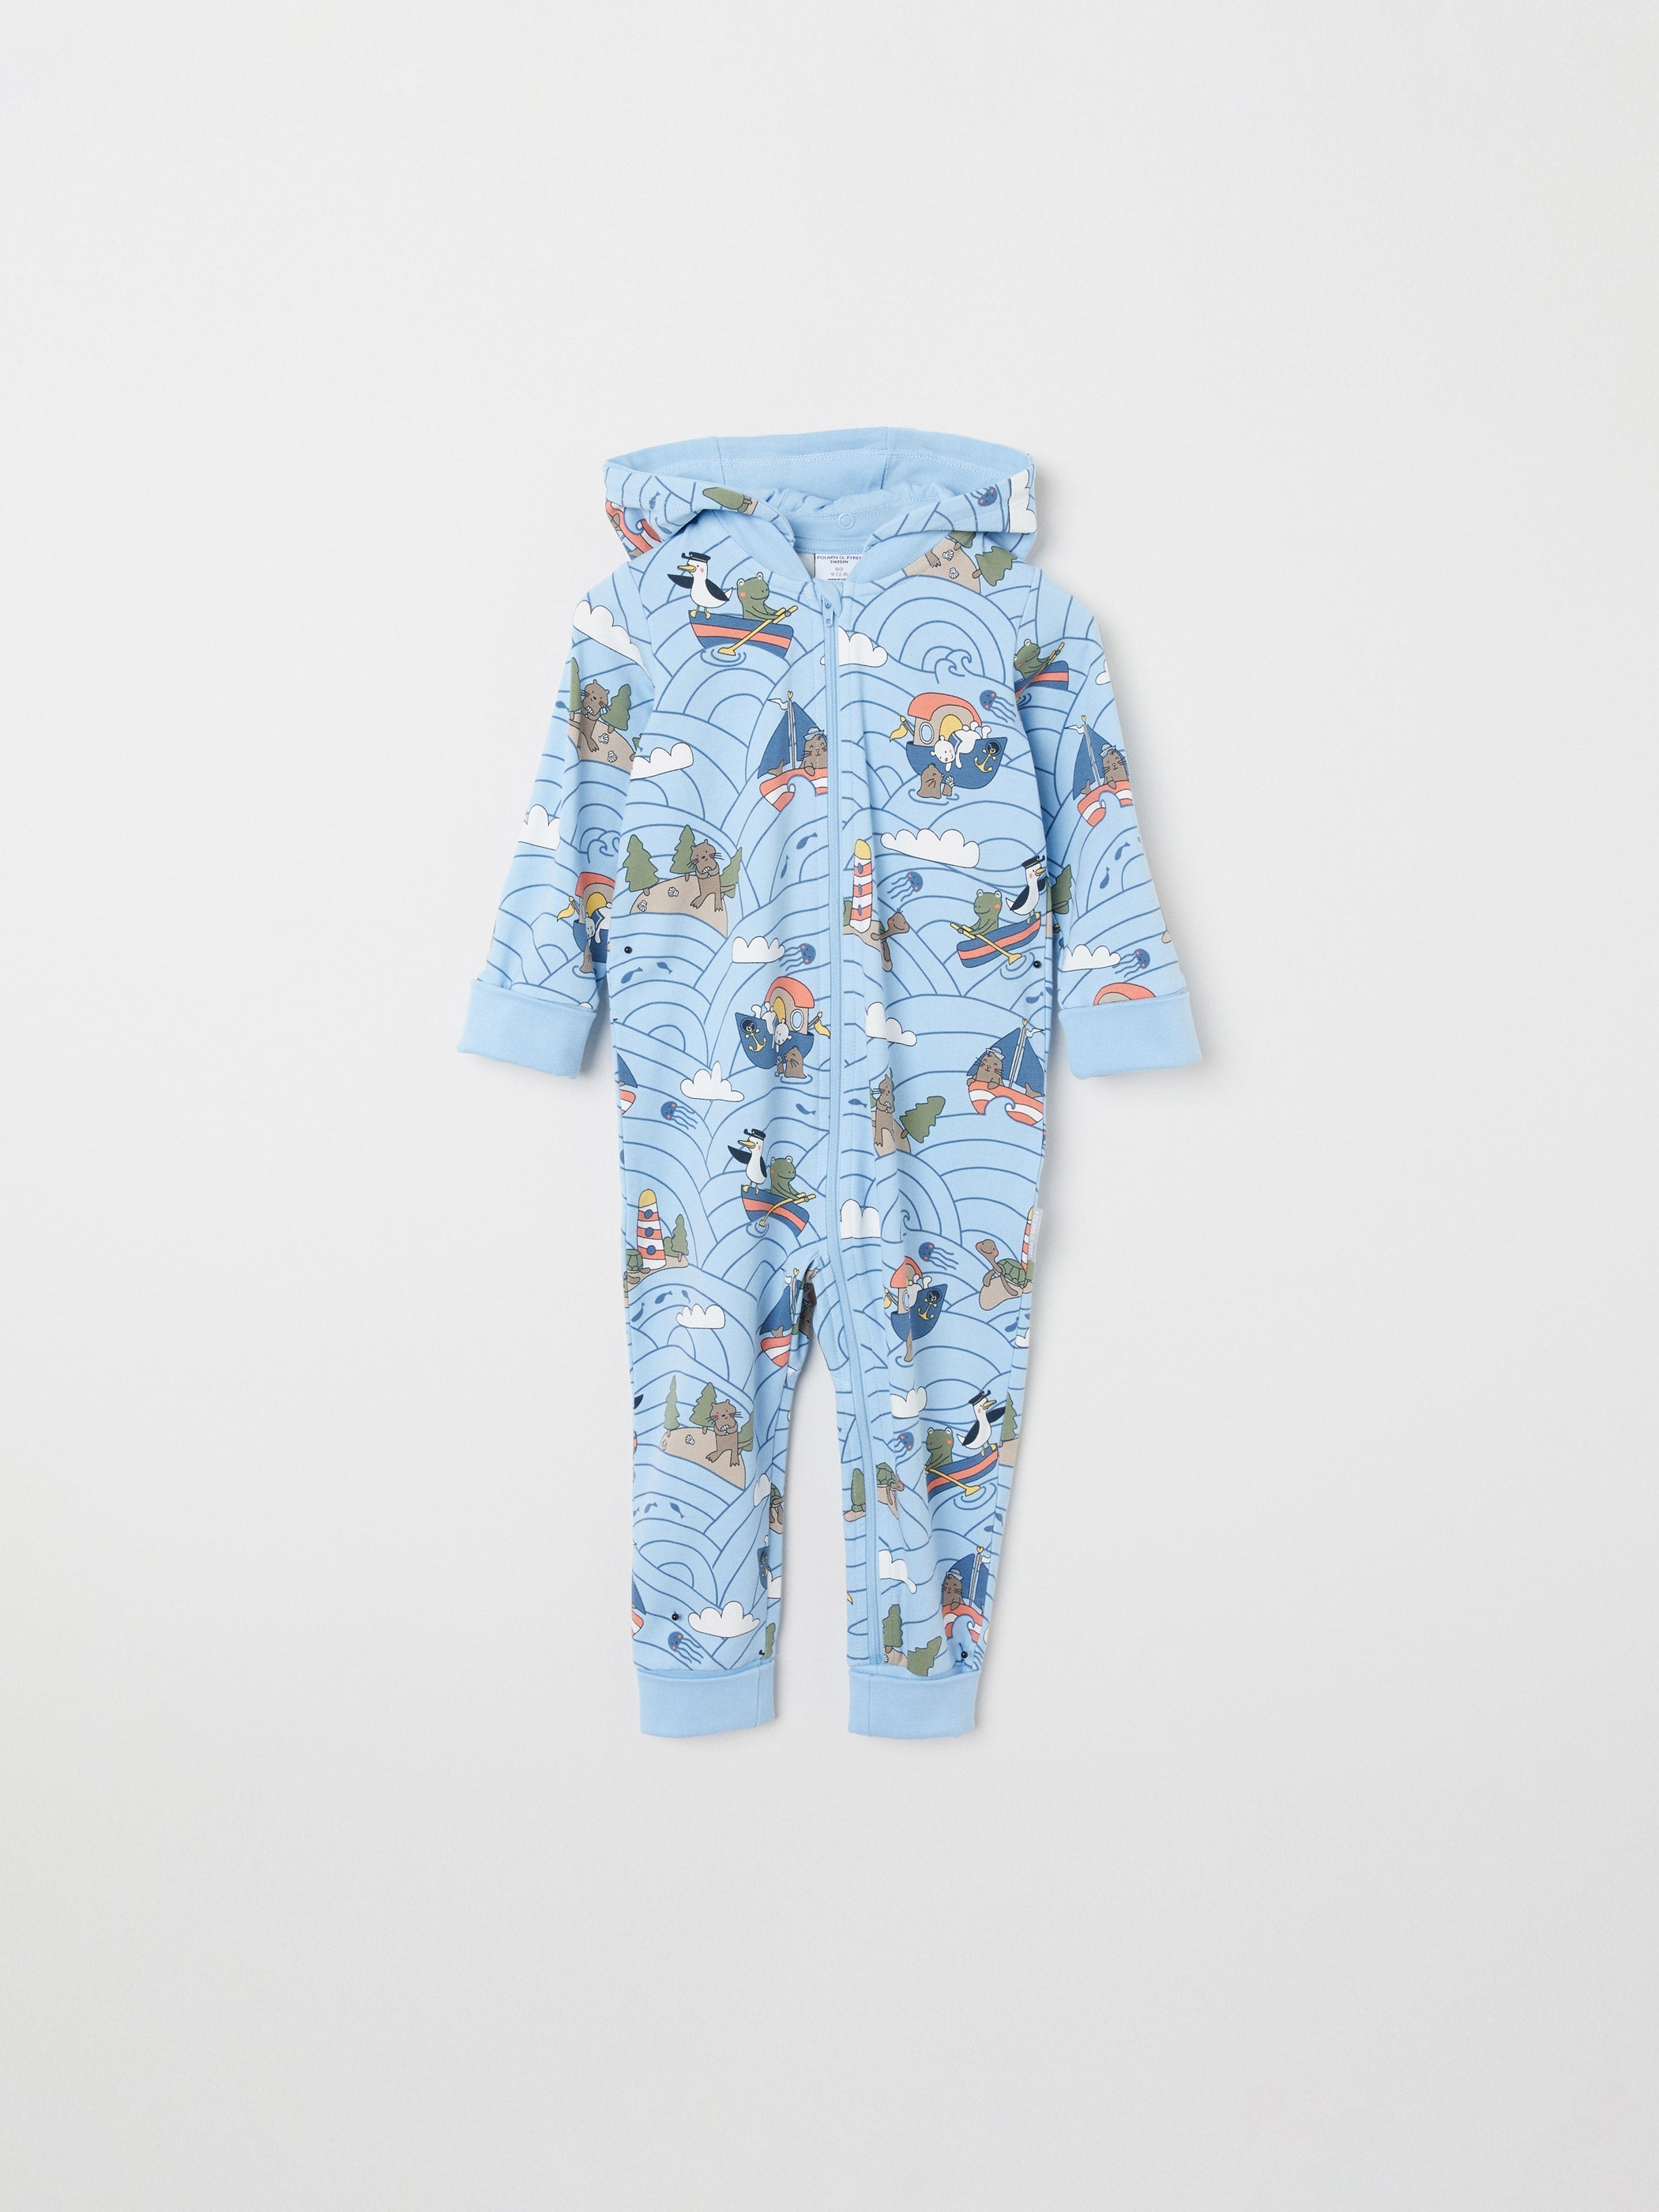 Sea Print Baby All-in-one